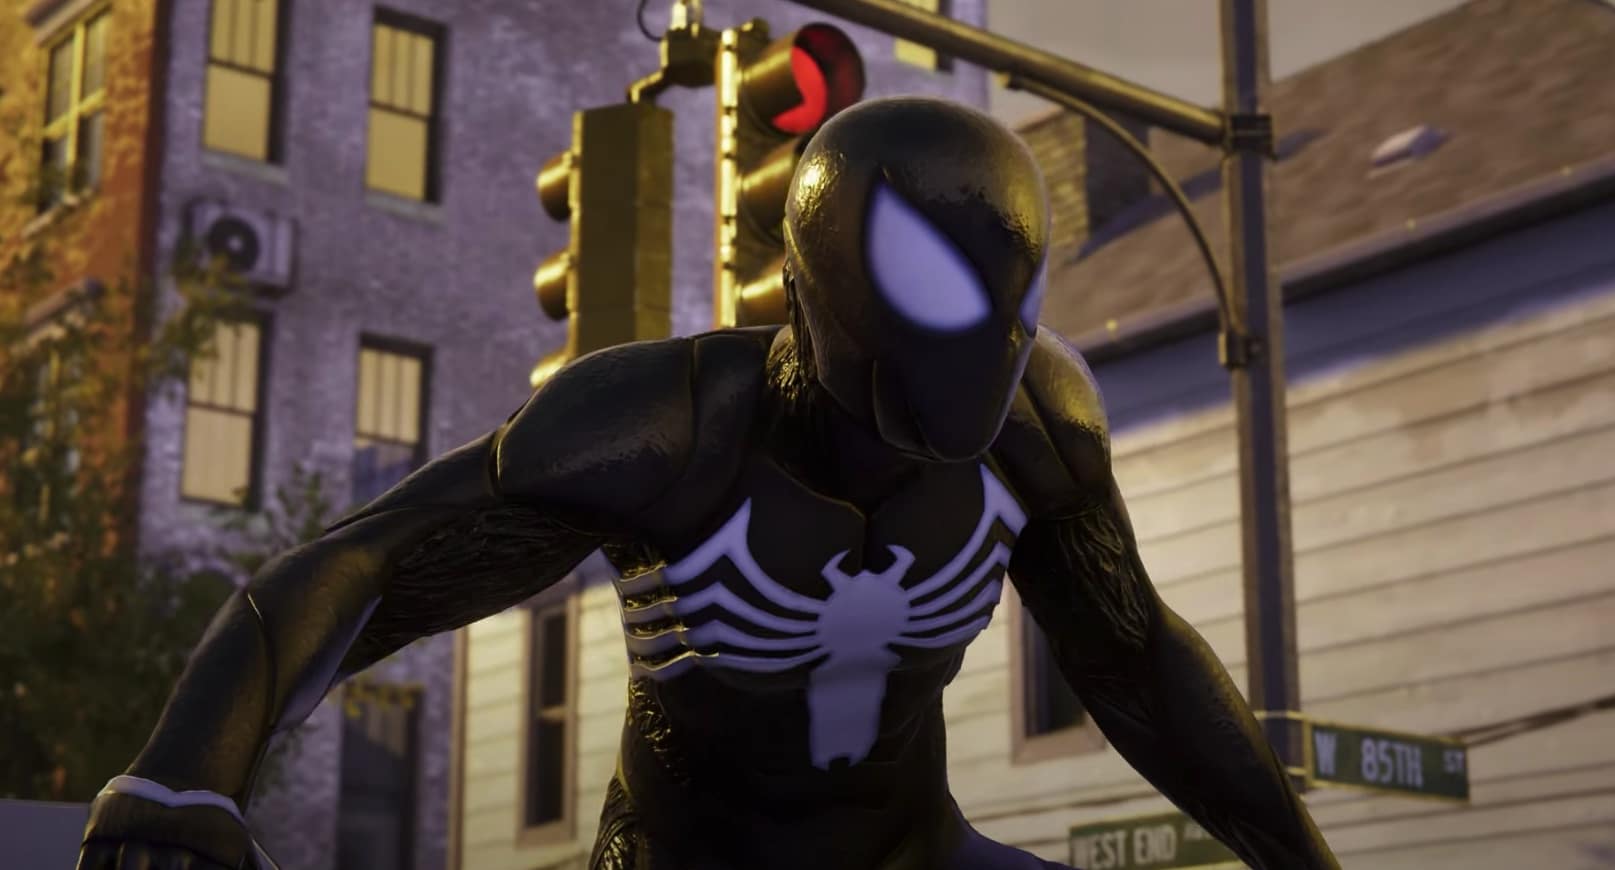 PlayStation Showcase: Project Q unveiled, Spider-Man 2 first look